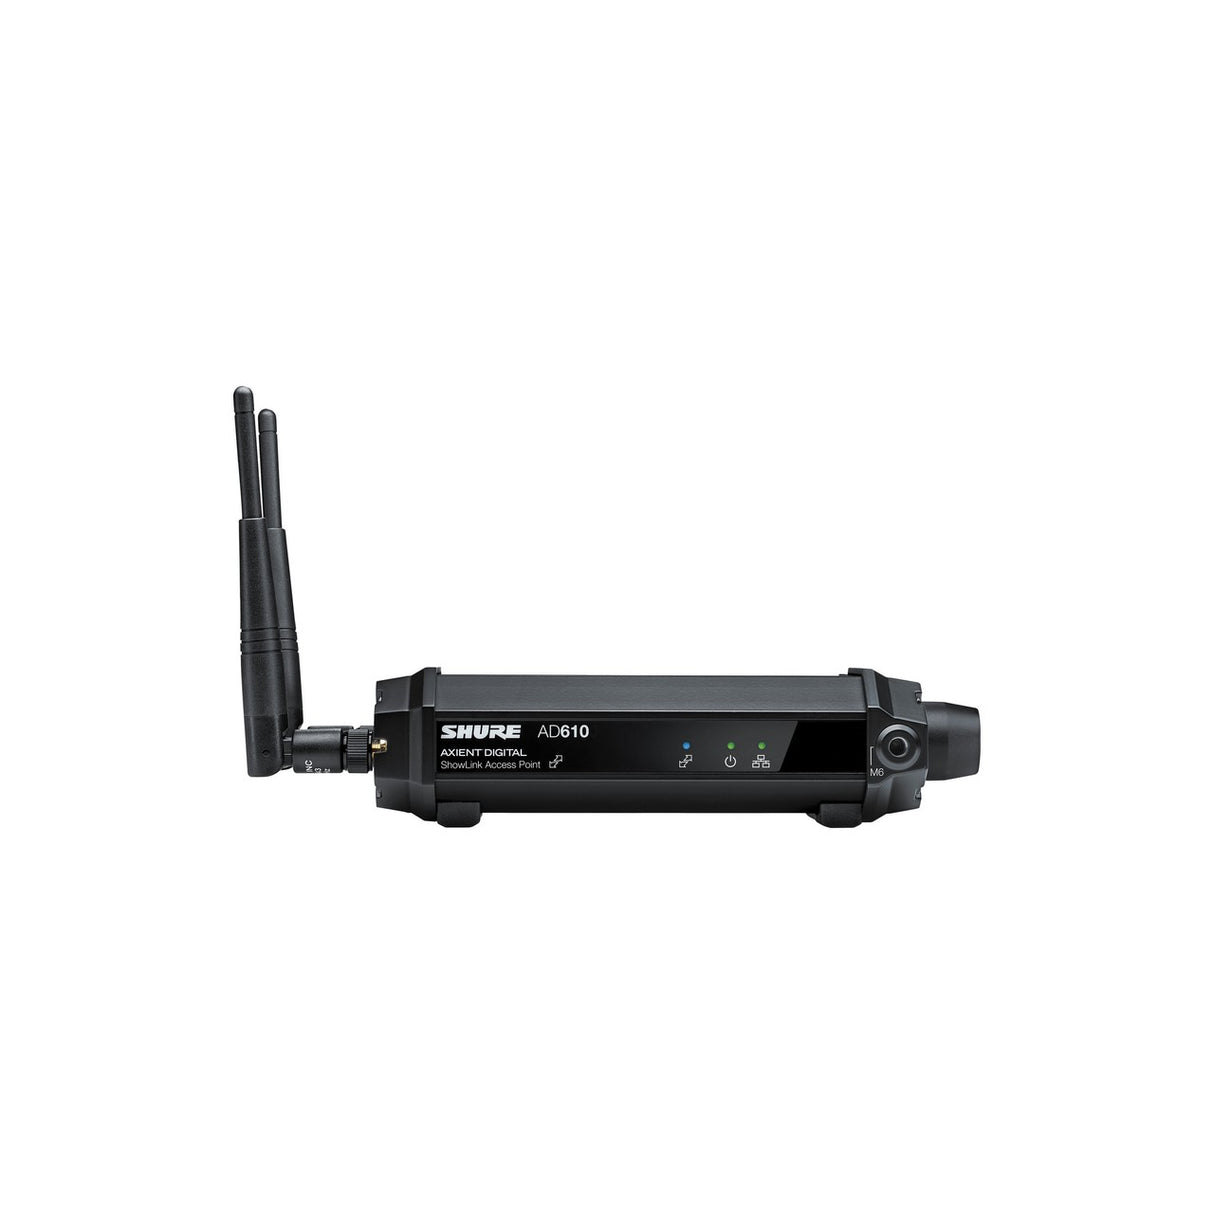 Shure AD610 Wireless ShowLink Access Point for Transmitters and Receivers